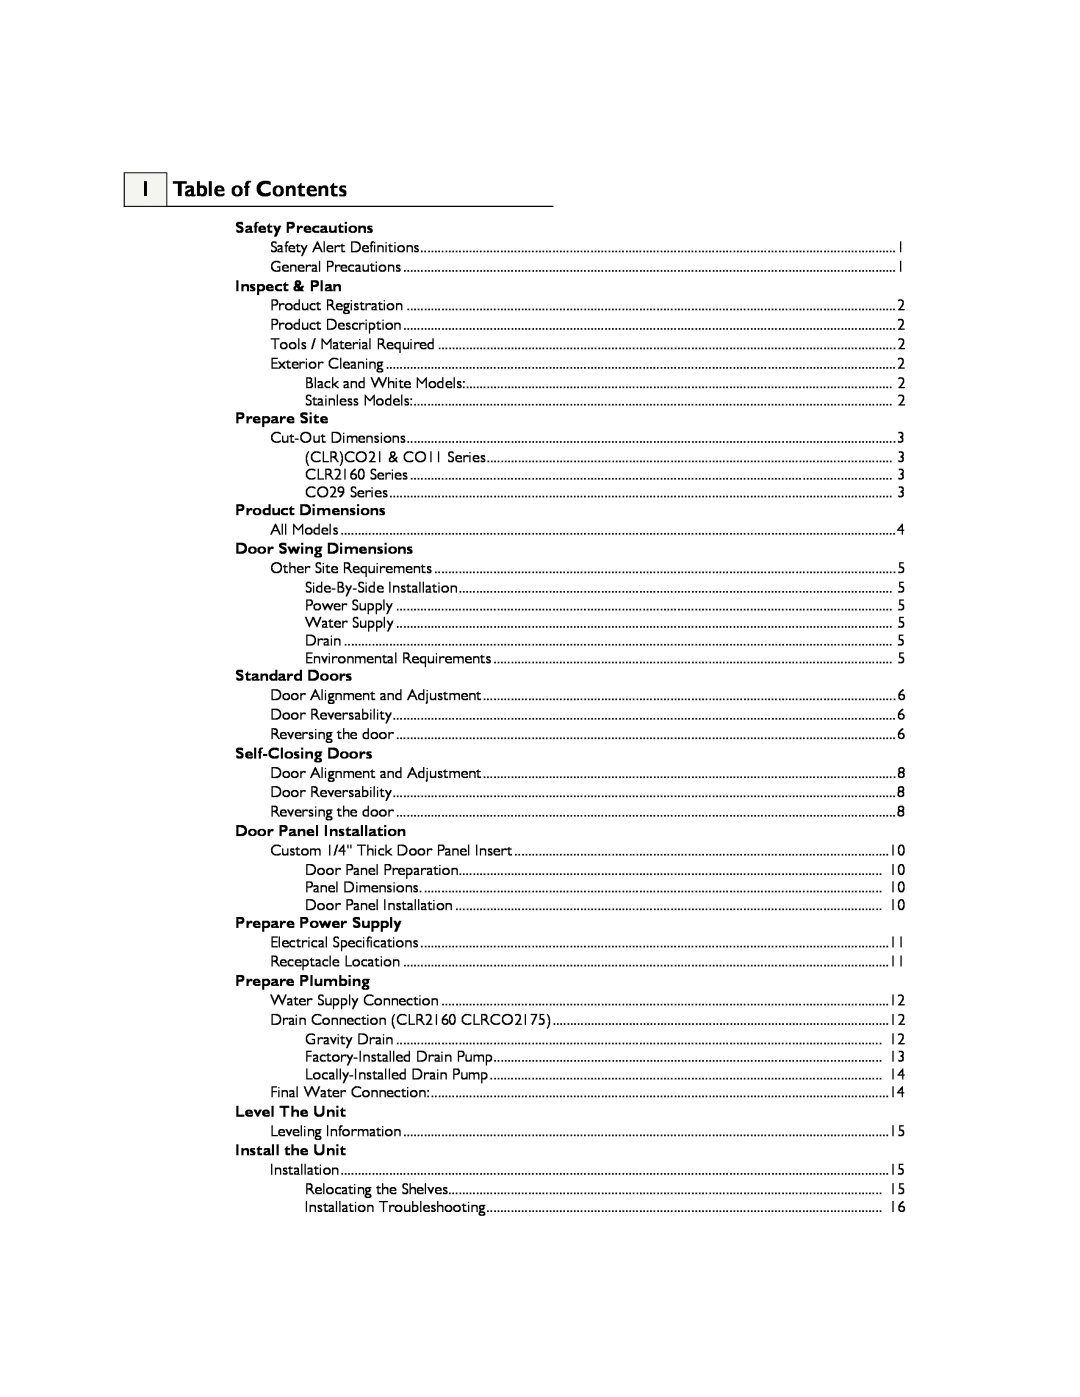 U-Line CO1175, CO2175 manual Table of Contents 